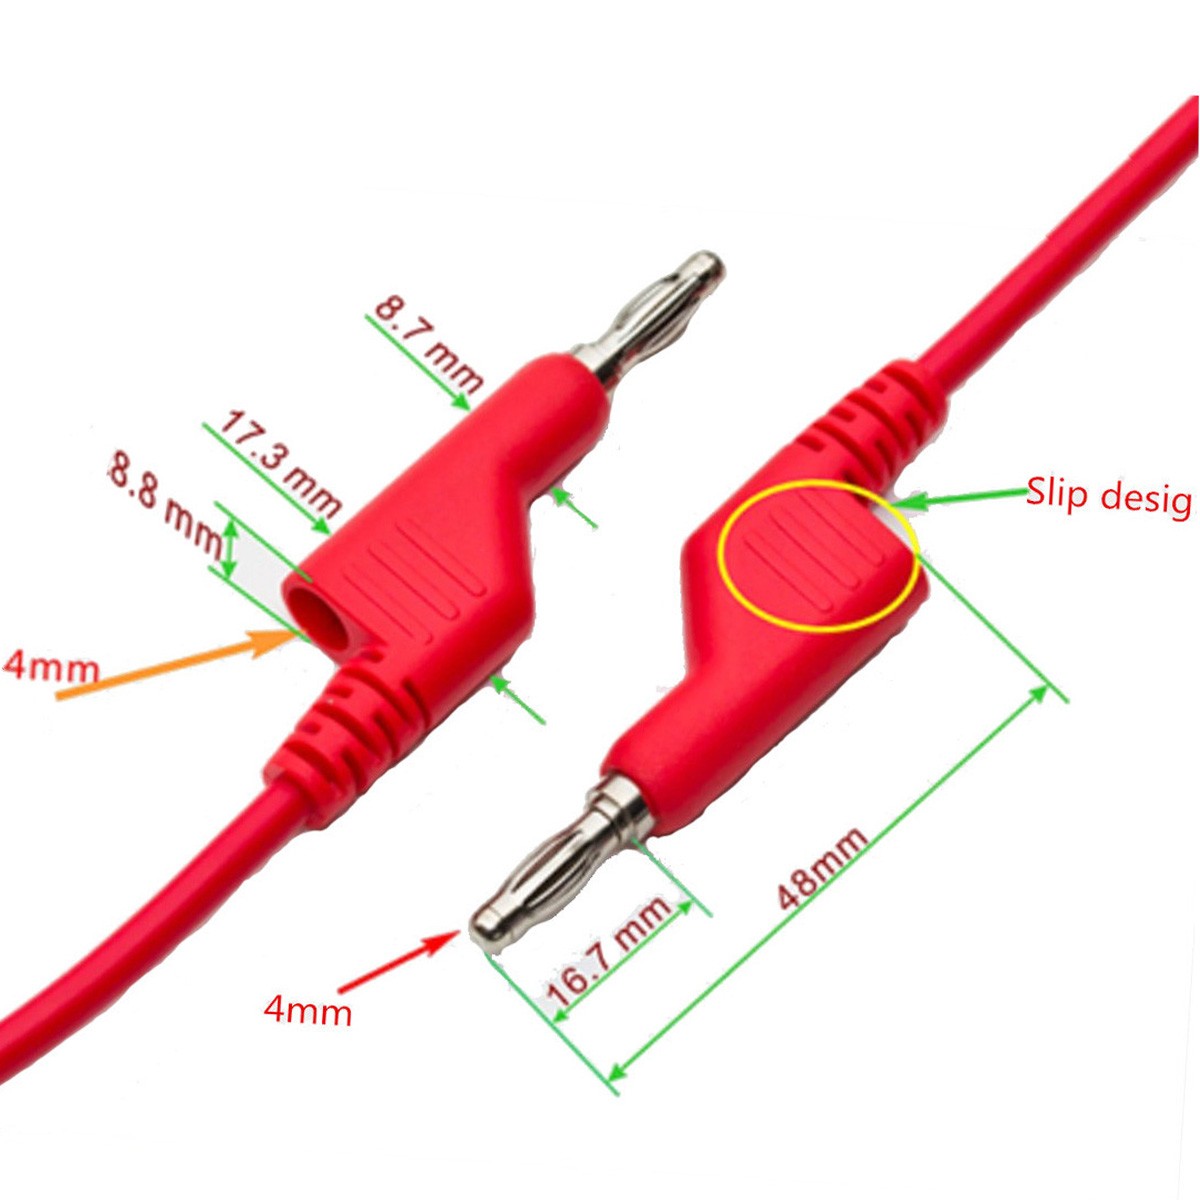 DANIU-4pcs-1M-4mm-Banana-to-Banana-Plug-Soft-Silicone-Test-Cable-Lead-for-Multimeter-4-Colors-1157595-2